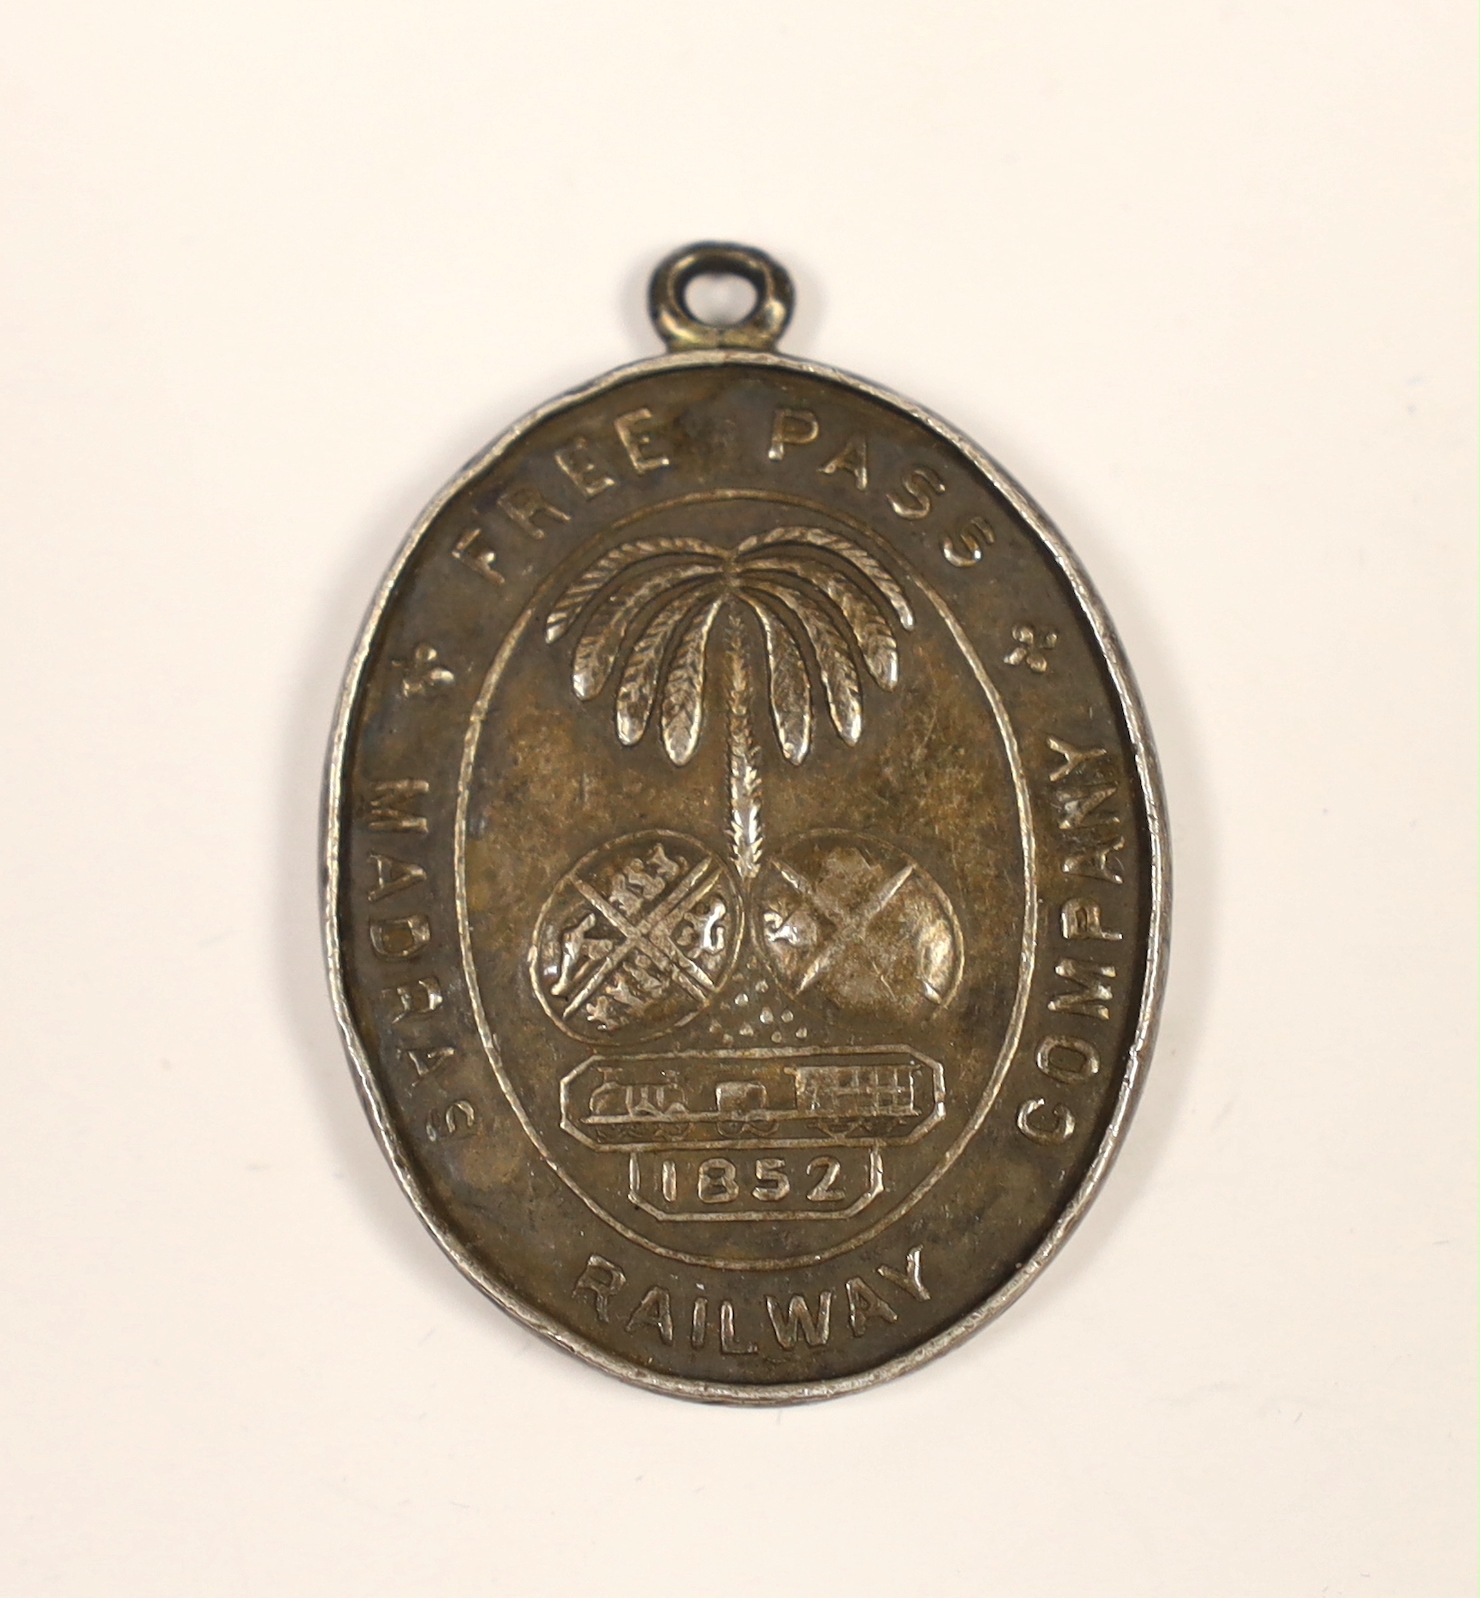 A scarce ‘Madras Railway Company free pass’ medallion, dated 1852, engraved ‘No125 ASST. TRAFFIC MANAGER’